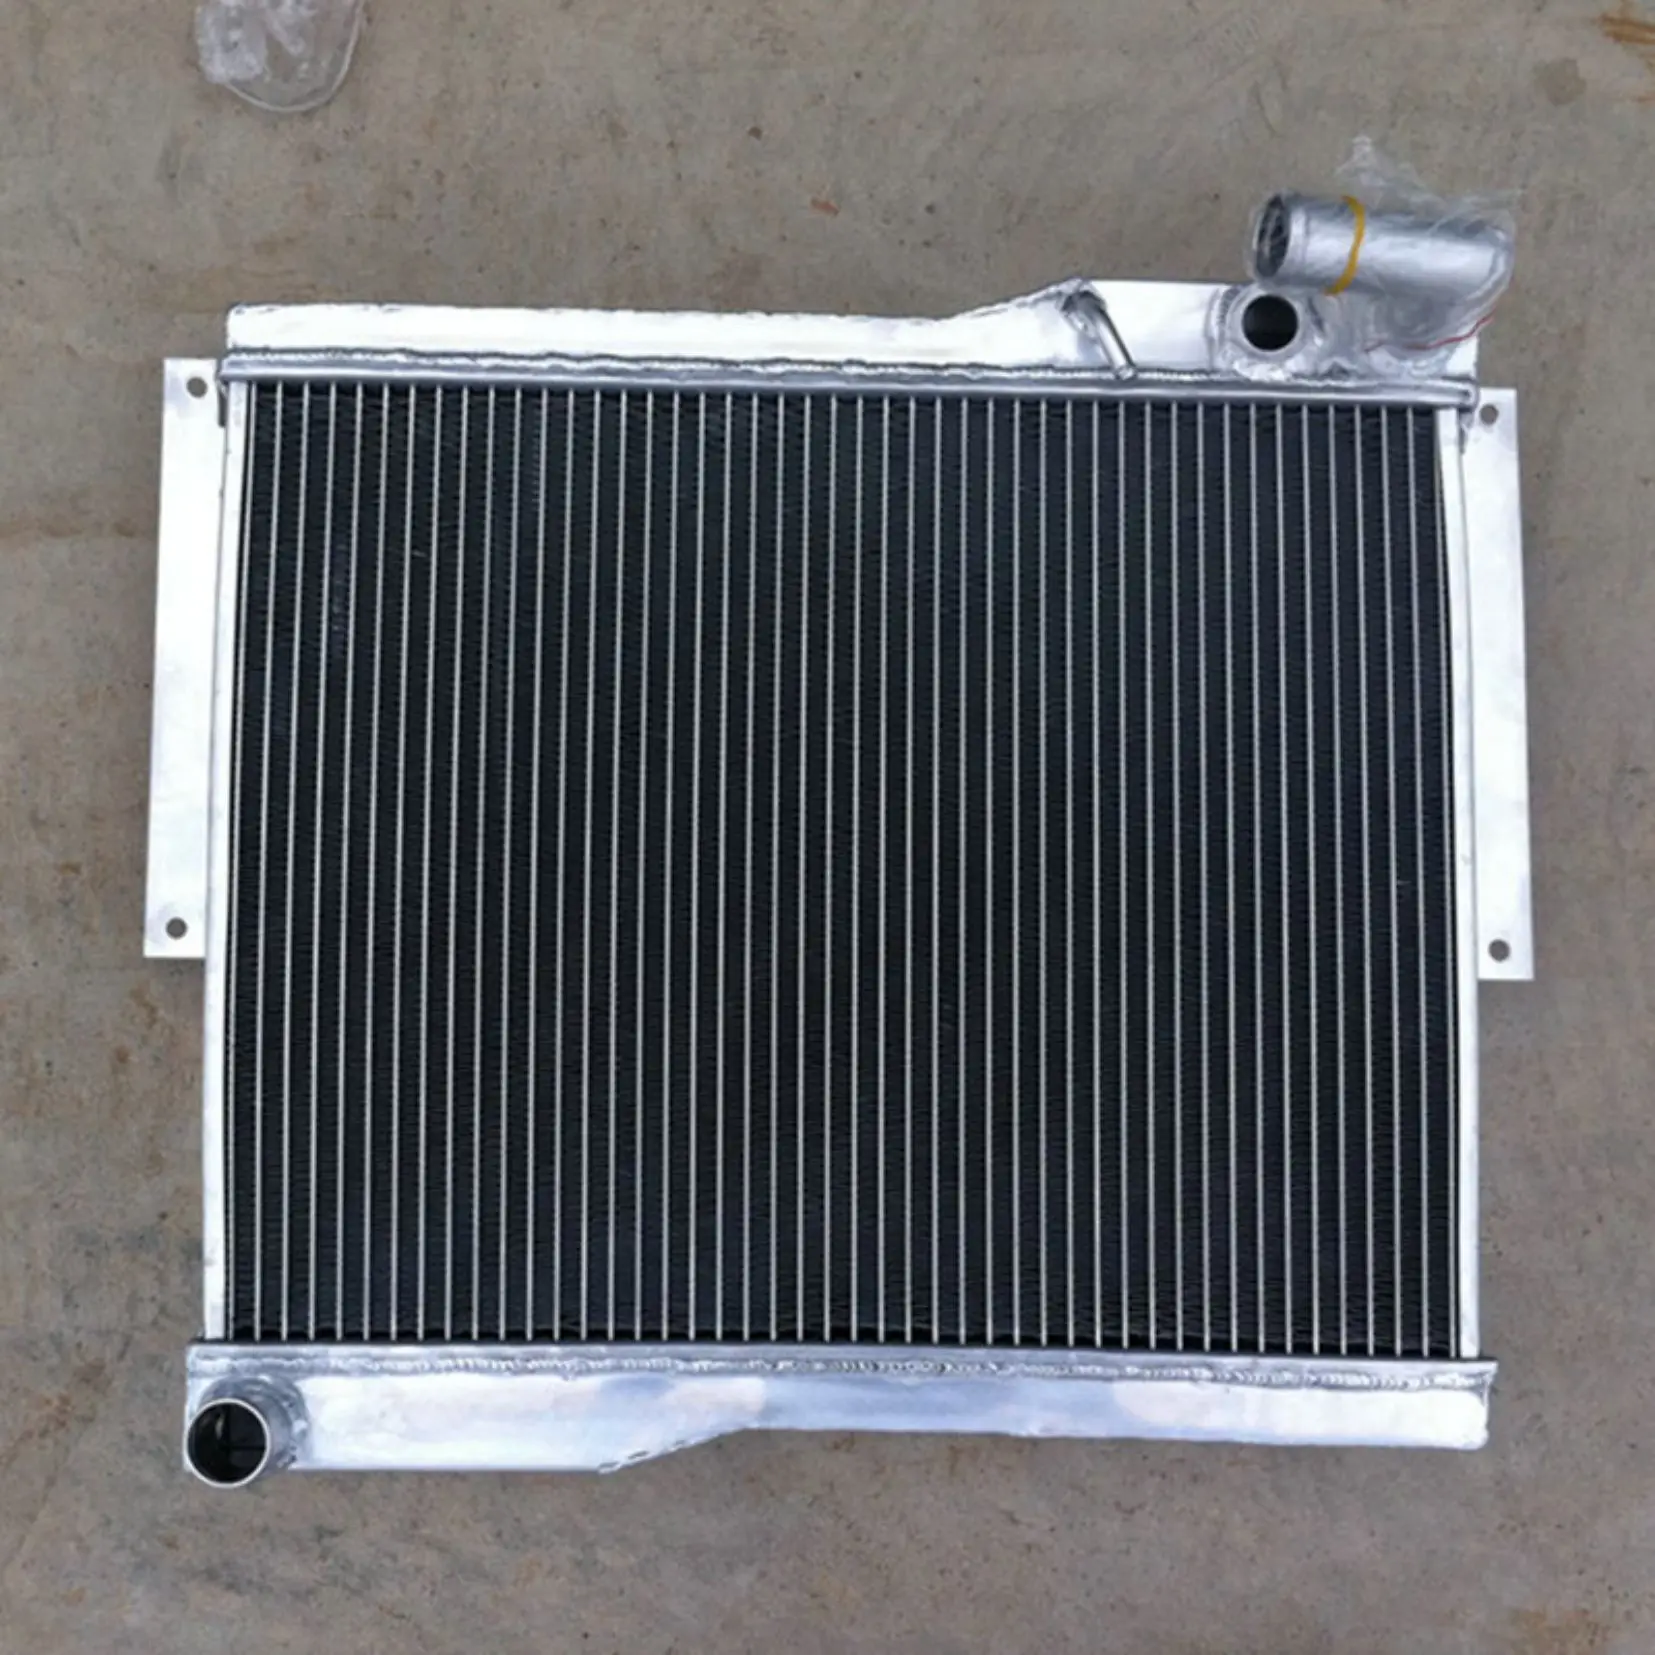 

2 Row Aluminum Radiator For 1977-1980 MG MGB GT / ROADSTER 1.8L ENGINE